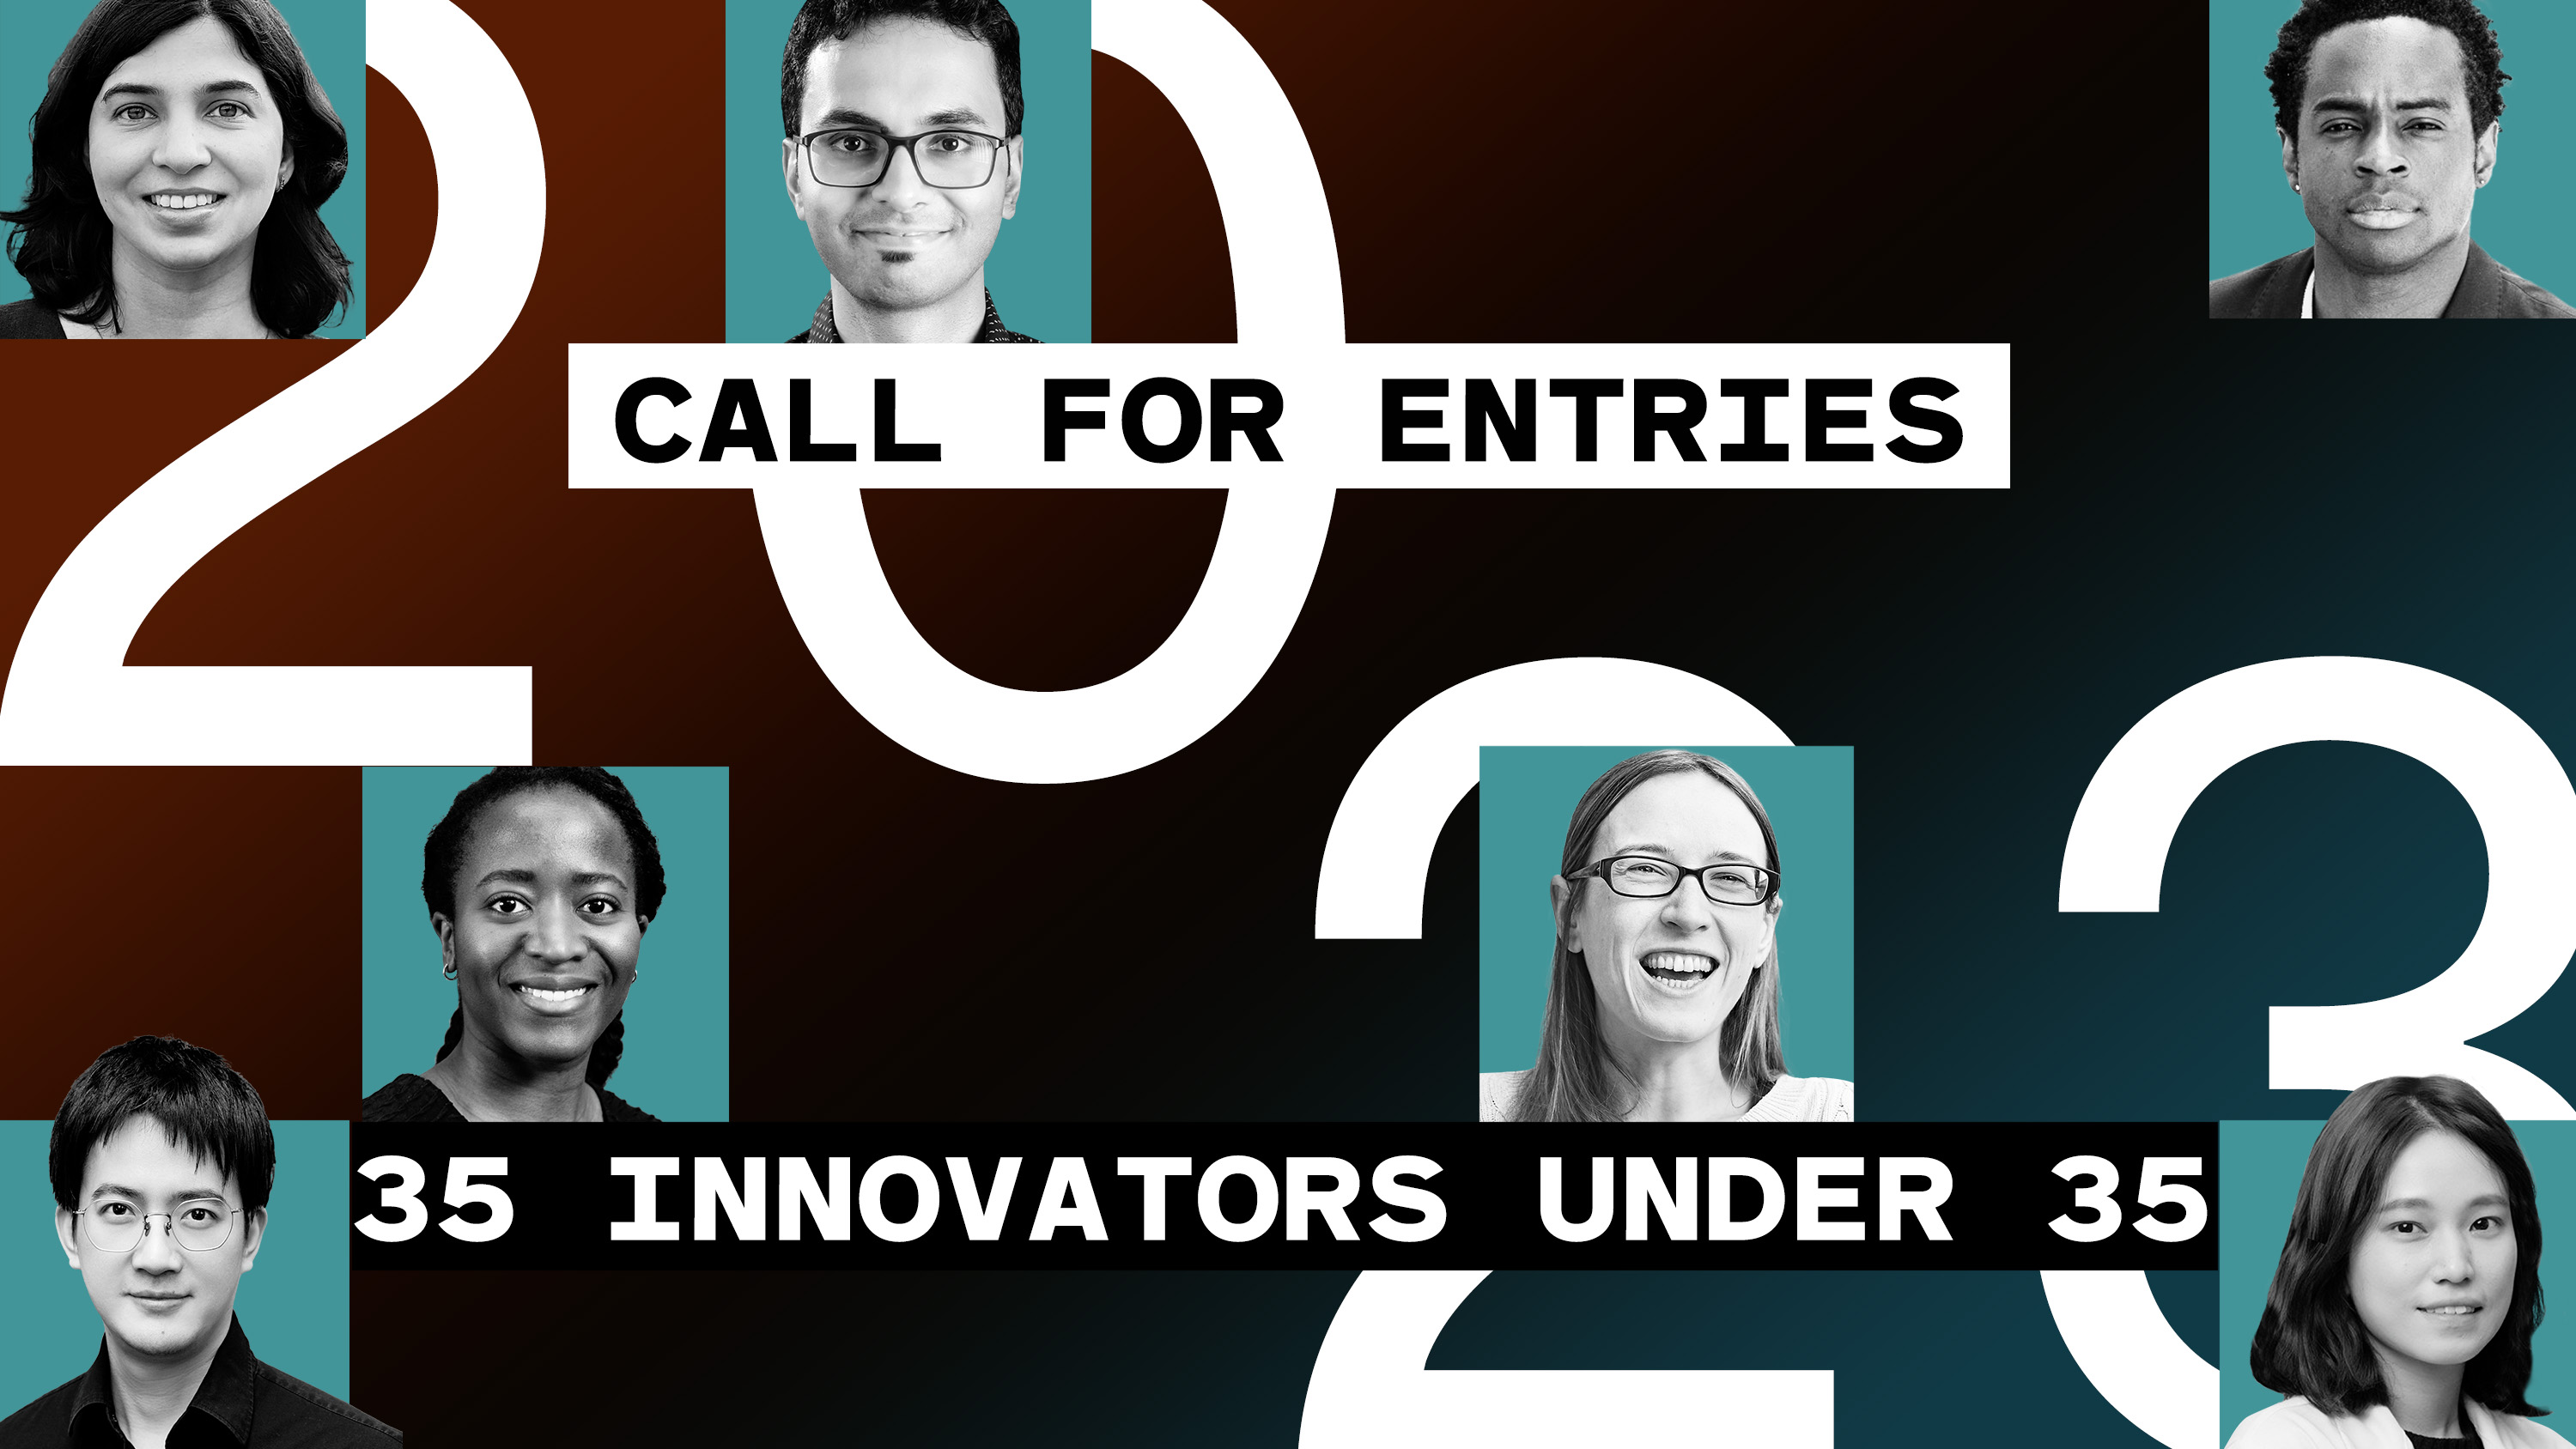 Call for Entries for Innovators Under 35, showing past winners